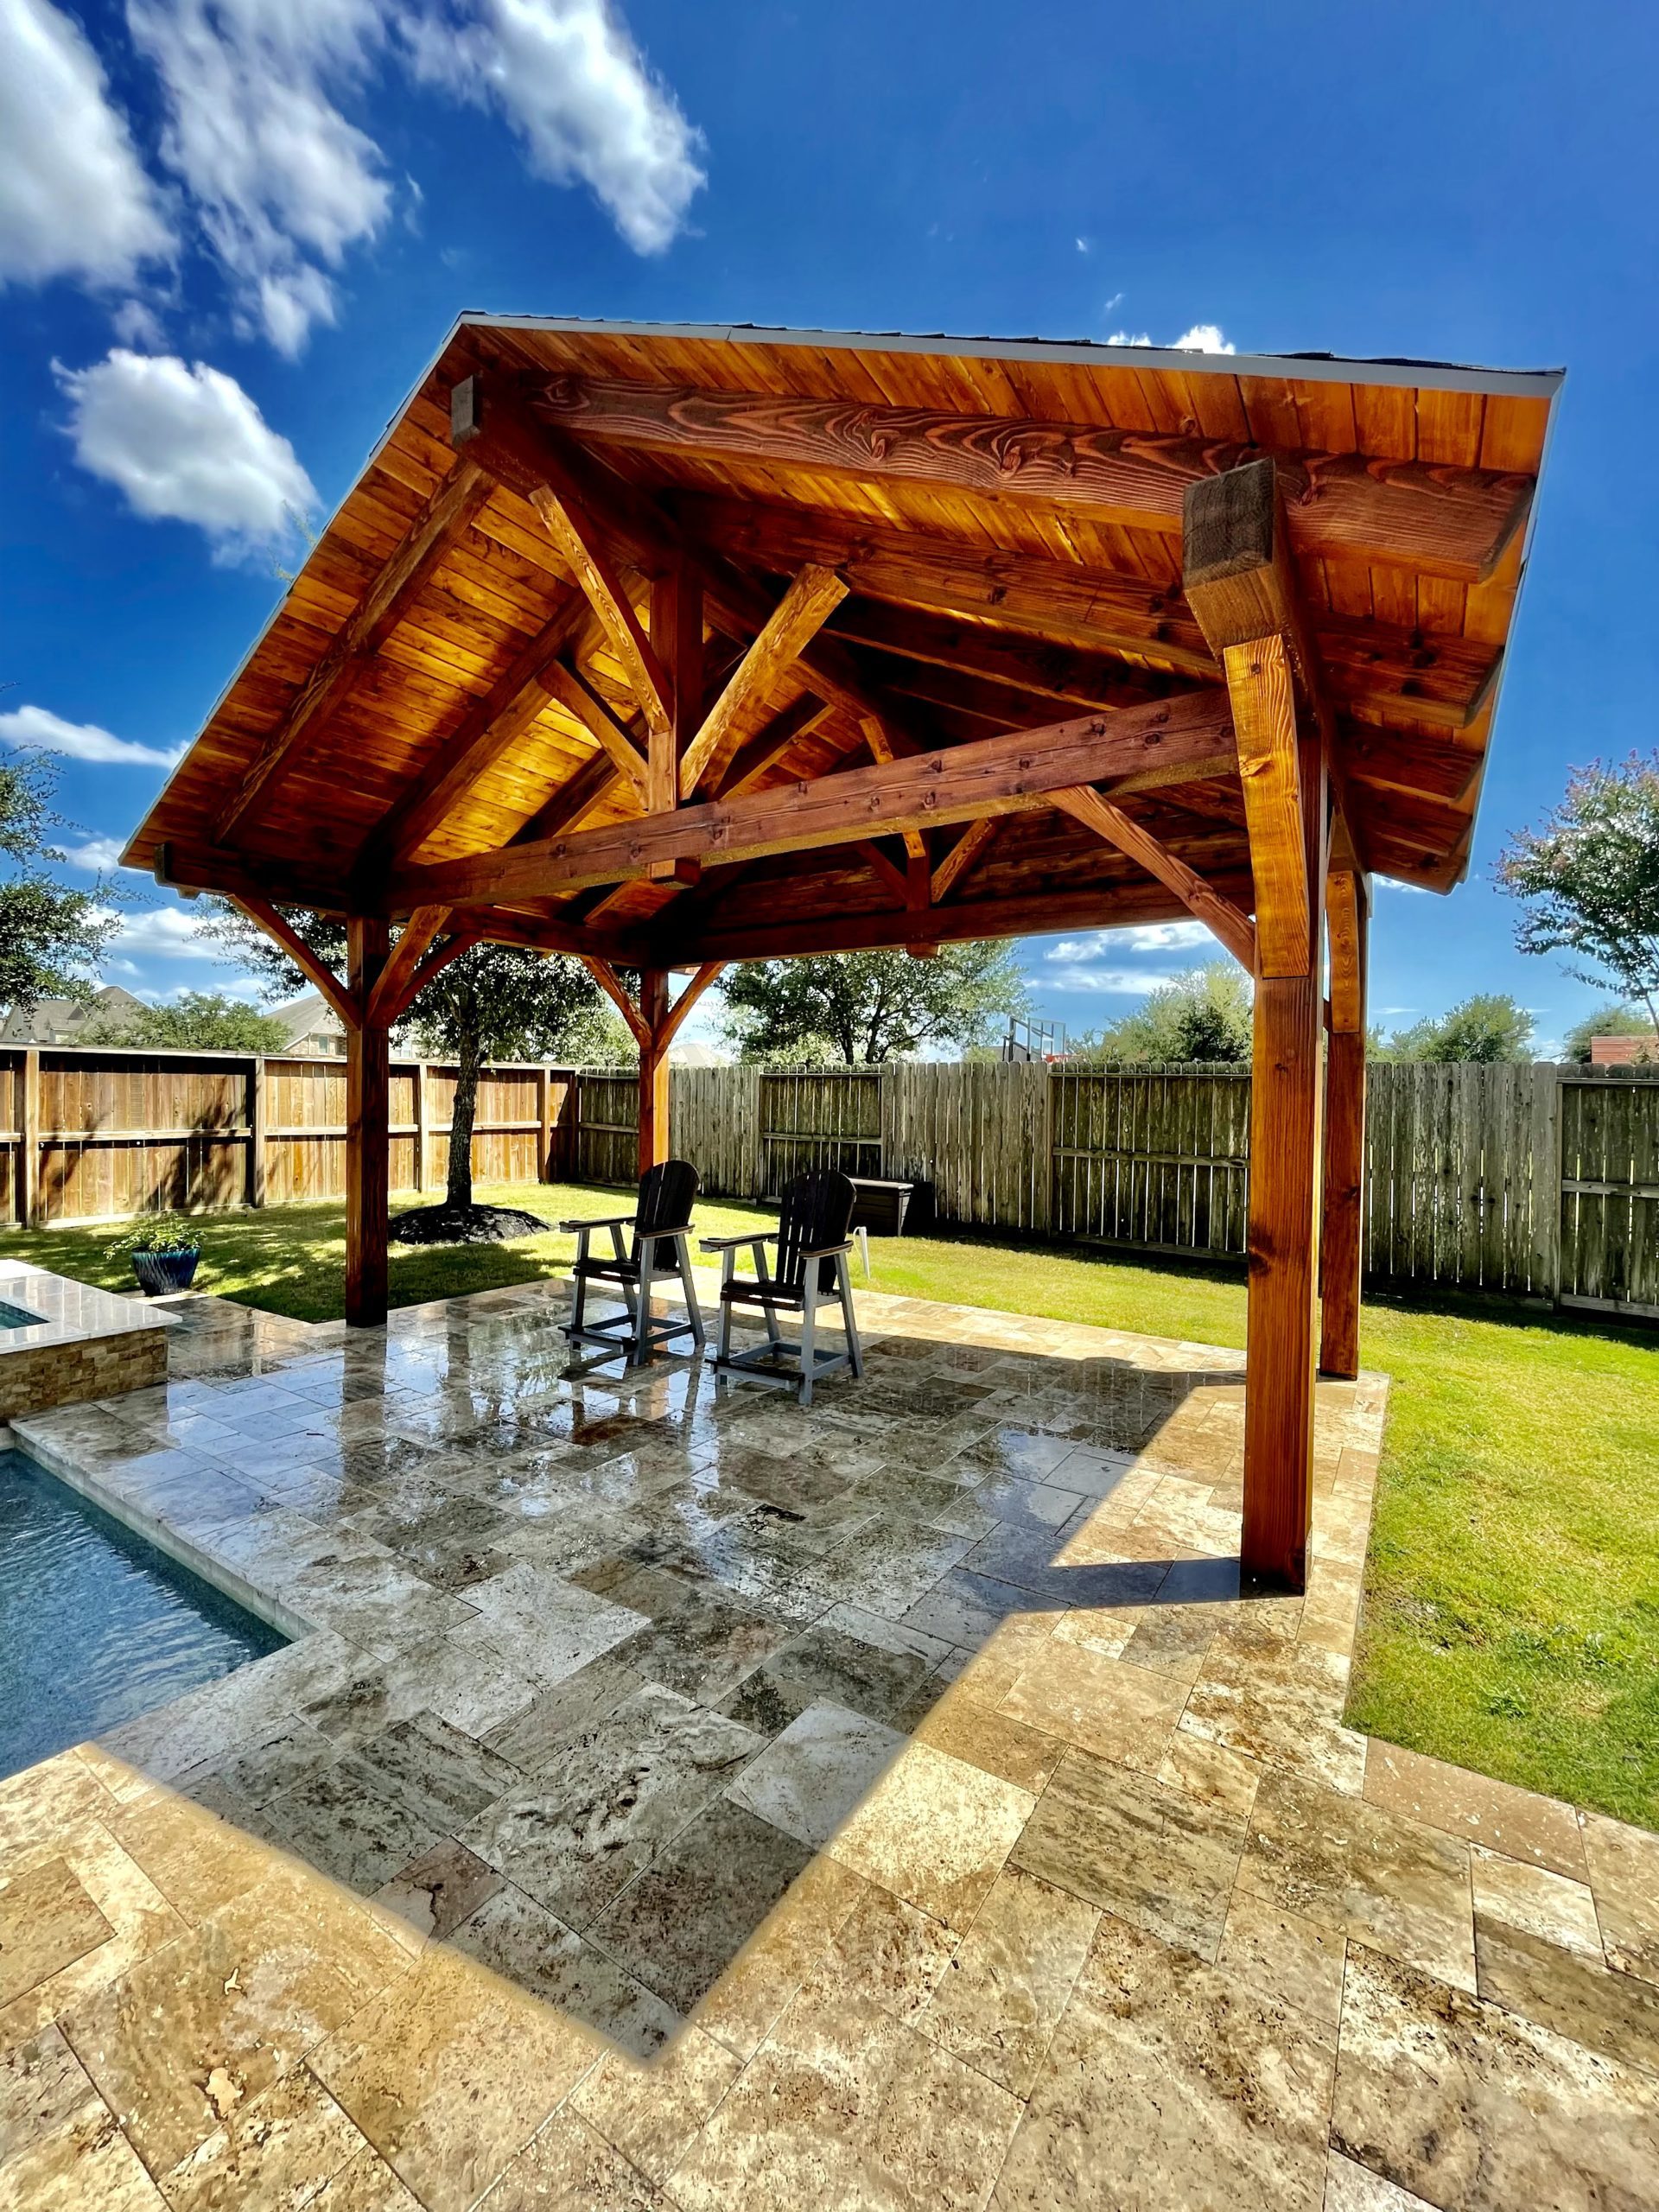 22x15, Cantilever, Rear Gable, Pavilion, Patios, Pool or Poolside, Patio Furniture, Cabana, Residential, Pavers, Cement or Concrete Pad, Garden Structure, Austin, Pre Fab, Outdoor Living